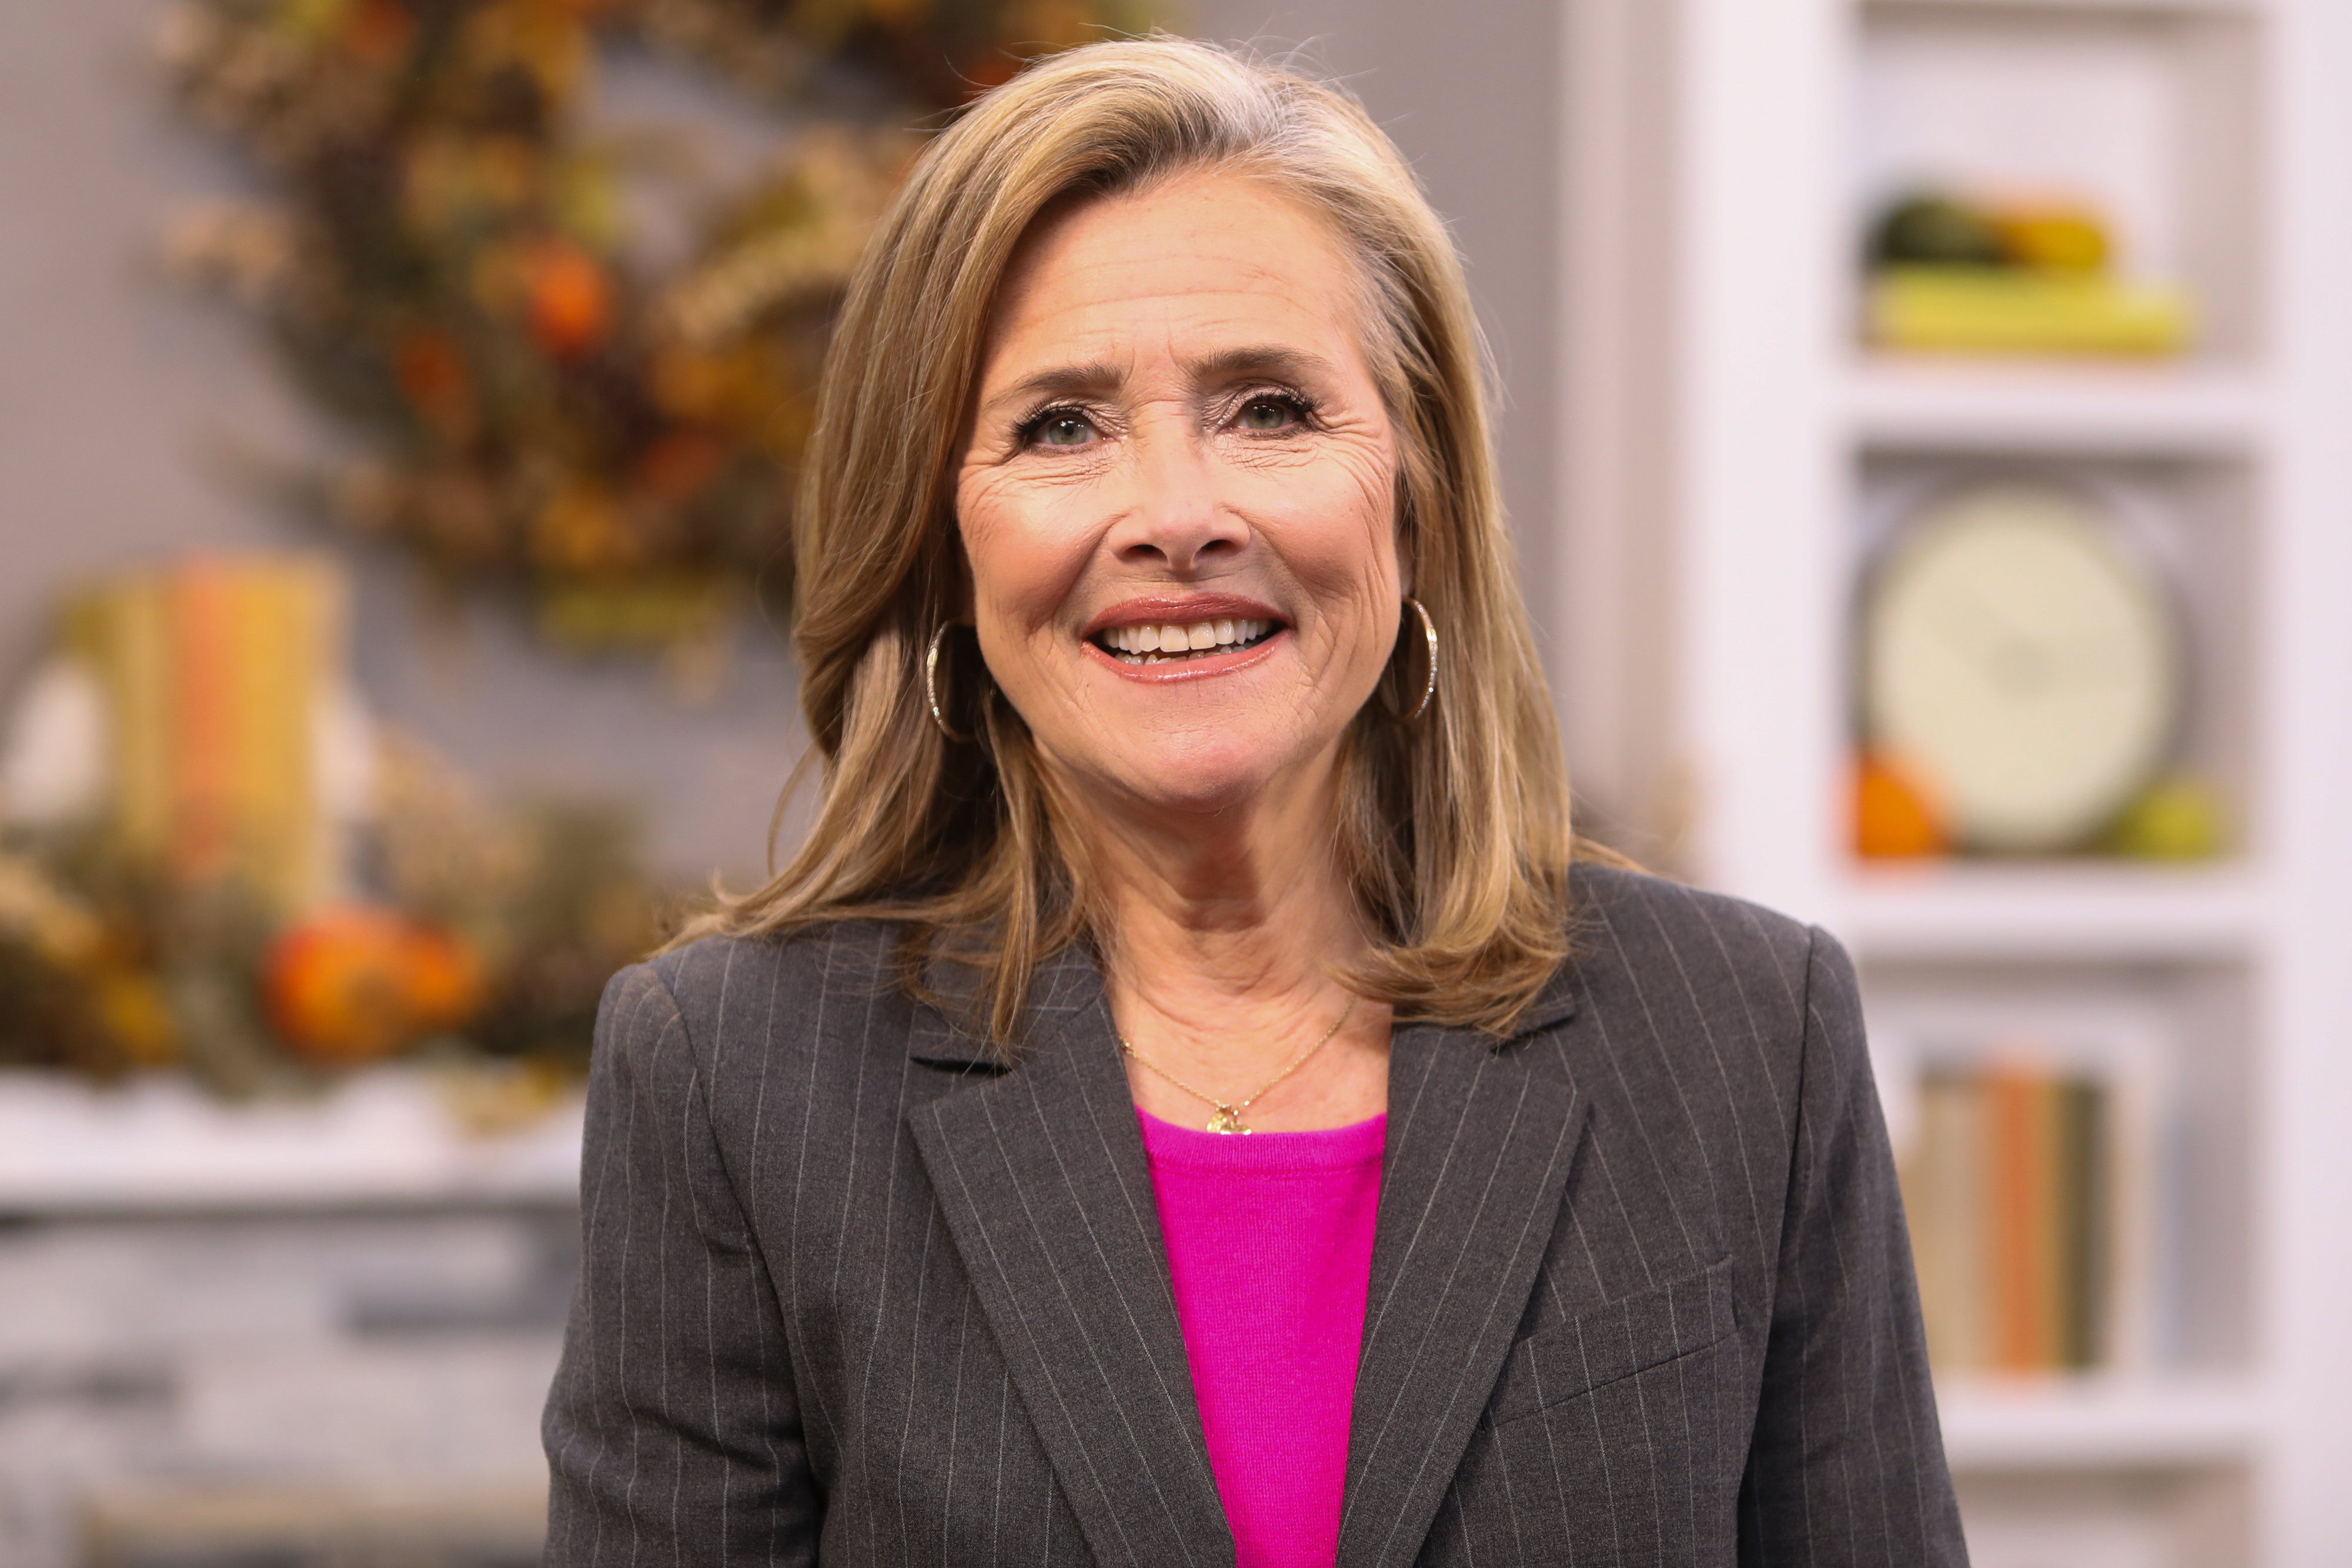 Meredith Vieira visits Hallmark Channel's "Home & Family" at Universal Studios Hollywood in Universal City, California on October 9, 2019. | Source: Getty Images